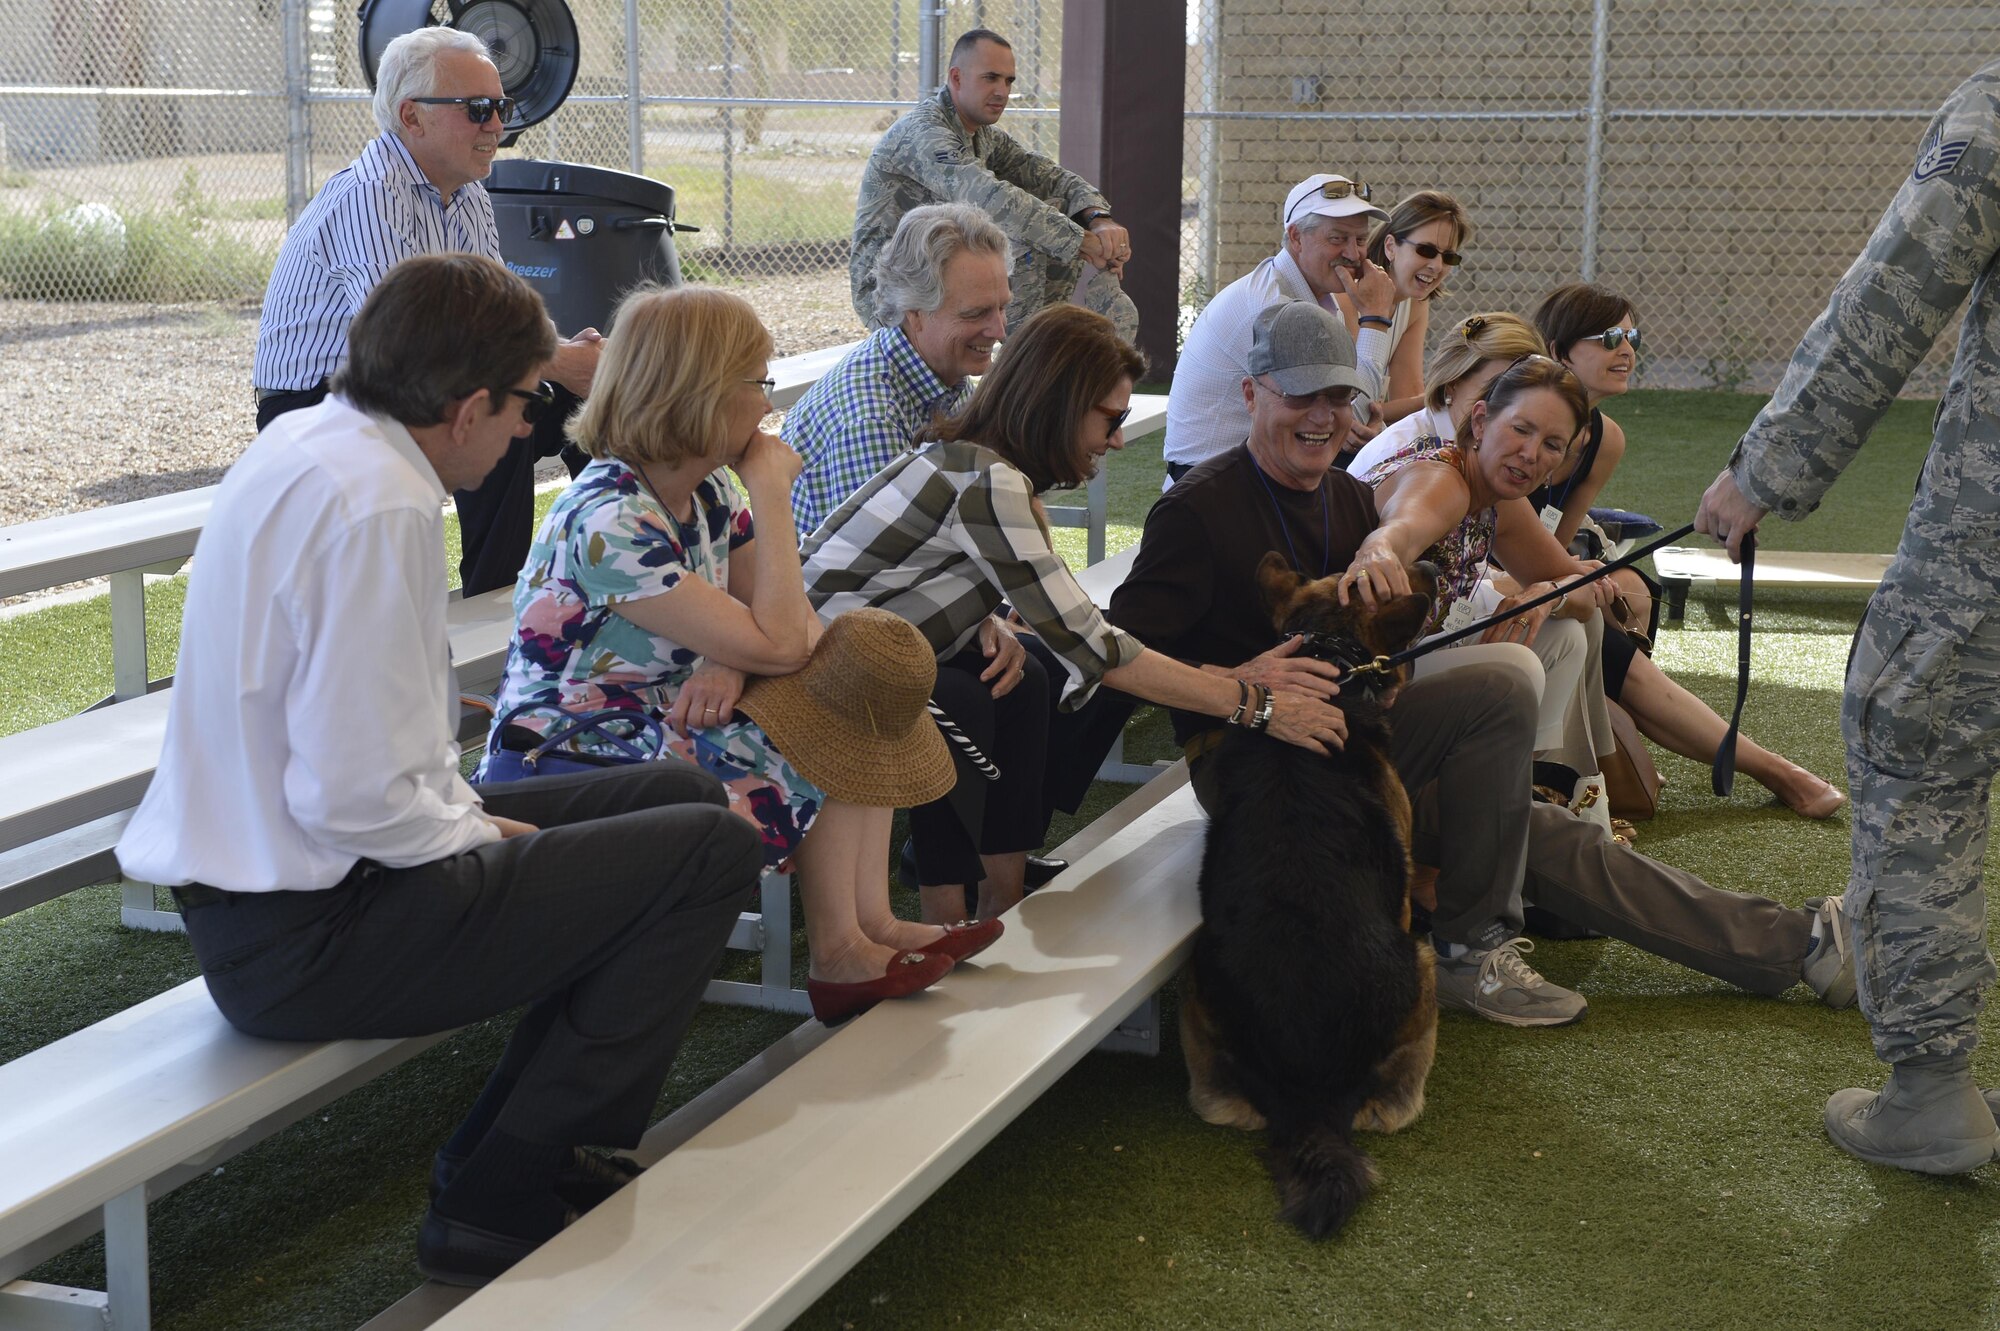 Members of the World President’s Group tour interact with Maxo, 56th Security Forces Squadron military working dog, April 21, 2016 at Luke Air Force Base, Ariz. The group was made up of civic leaders from the local community and toured the base to learn more about Luke's mission. (U.S. Air Force photo by Senior Airman James Hensley)